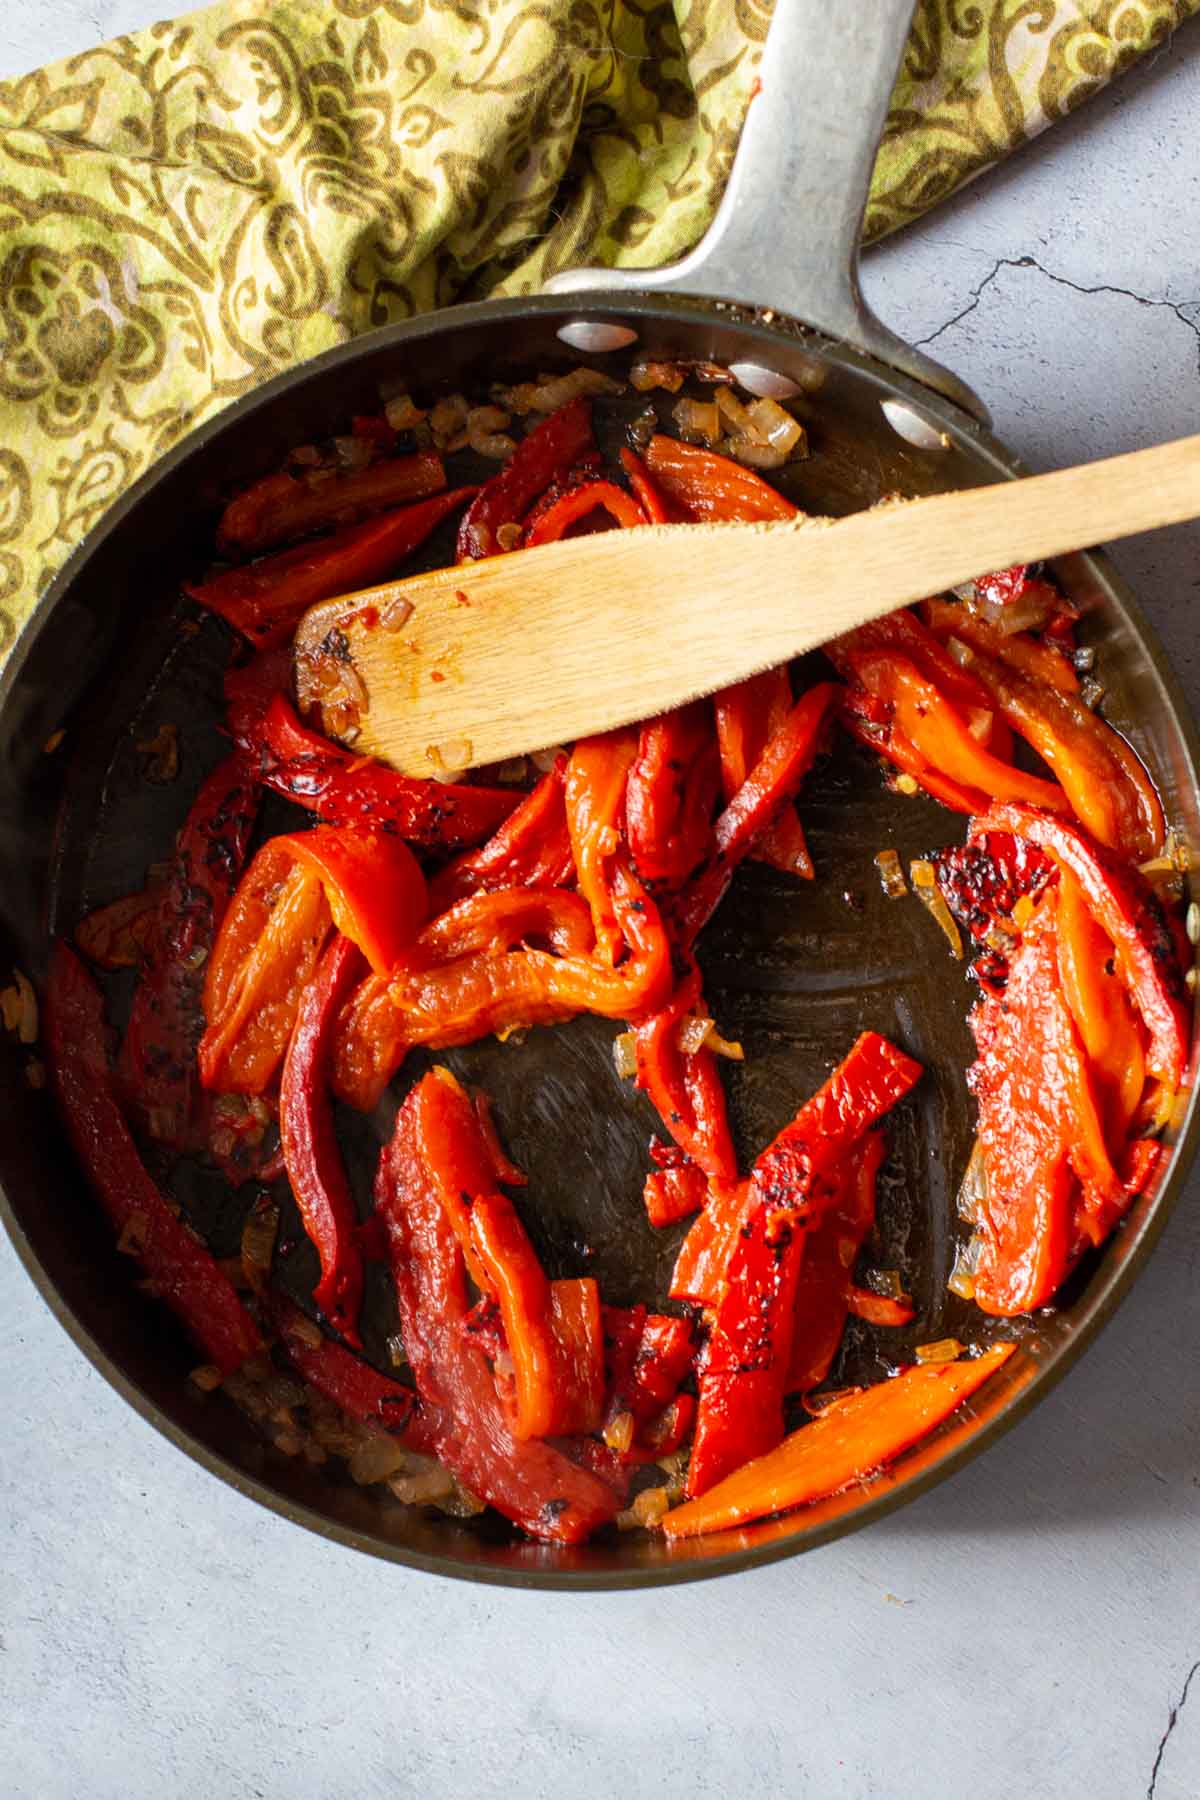 Frying roasted red bell peppers in a fry pan to make red pepper coulis.